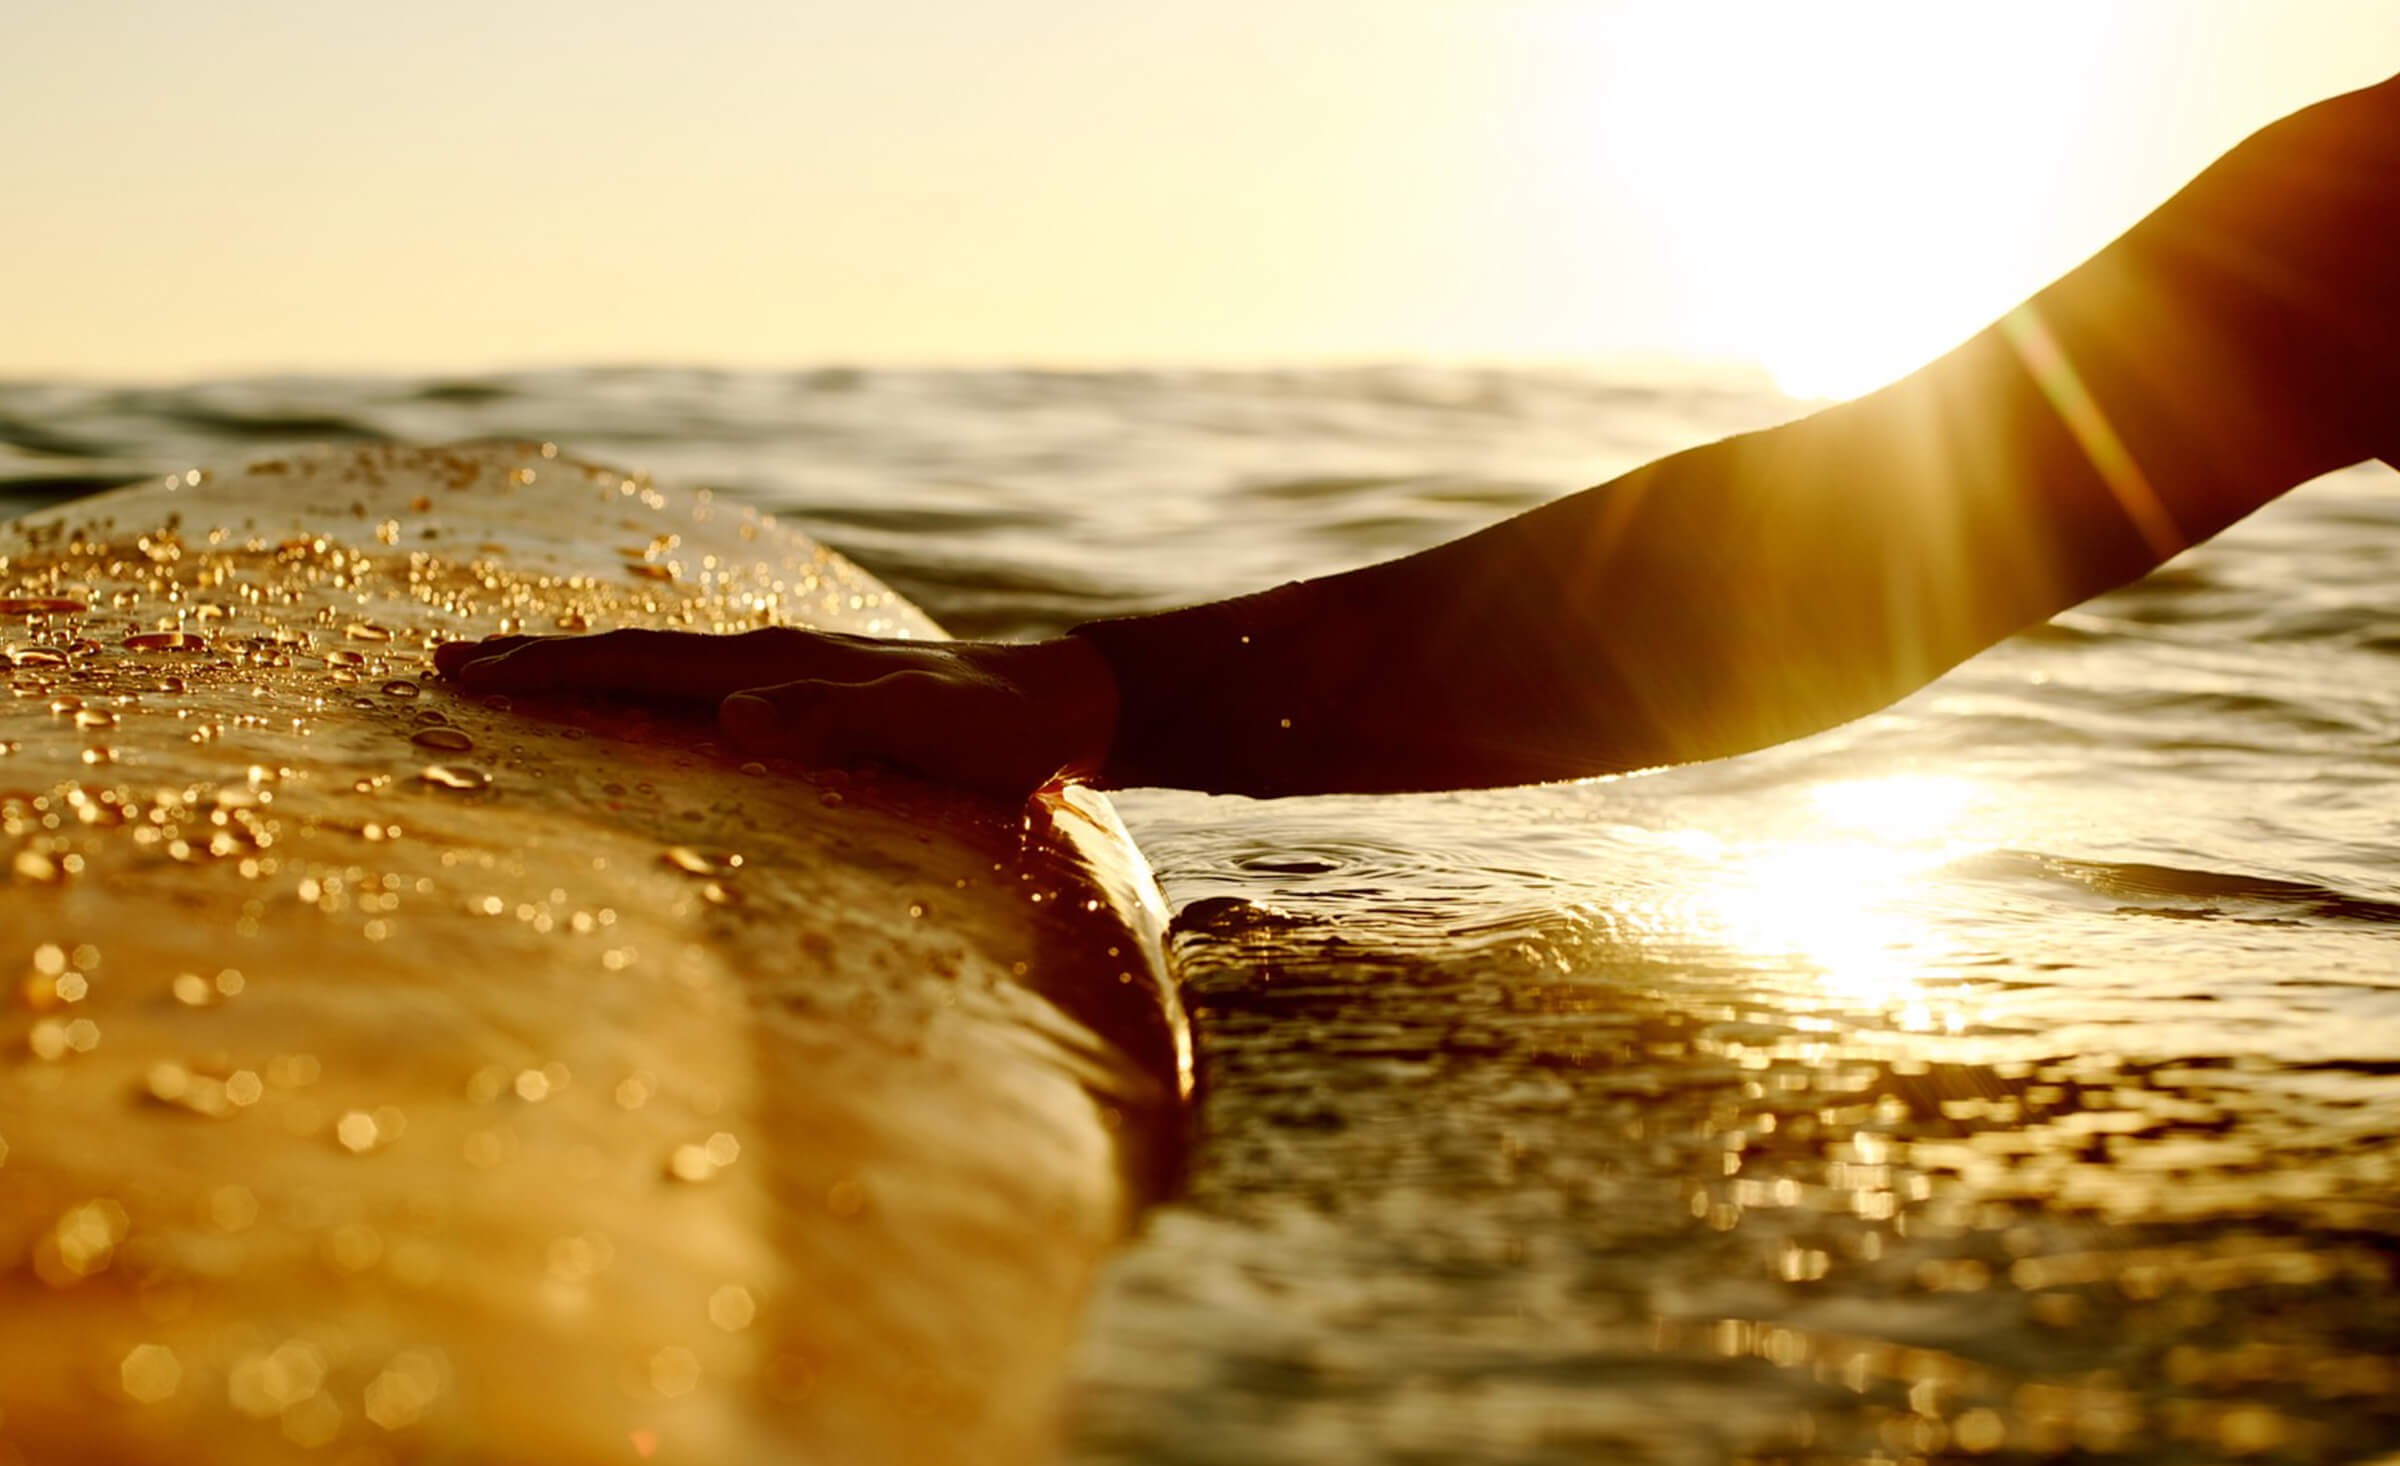 Hand touches surfboard in the ocean with sun setting over the horizon in the background